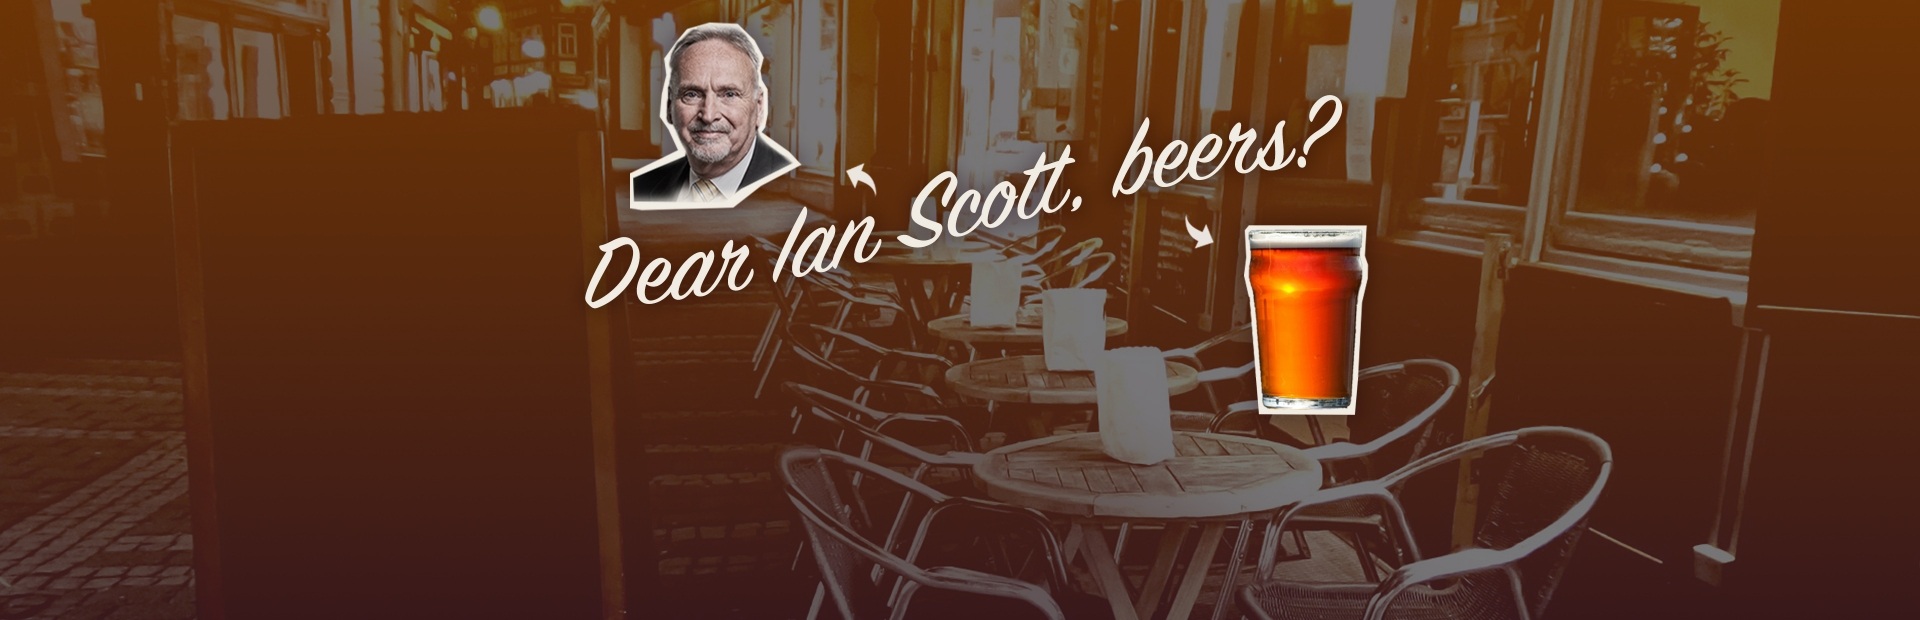 Send Ian Scott an invite for patio beers to talk Internet regulation — just like he did with Bell!